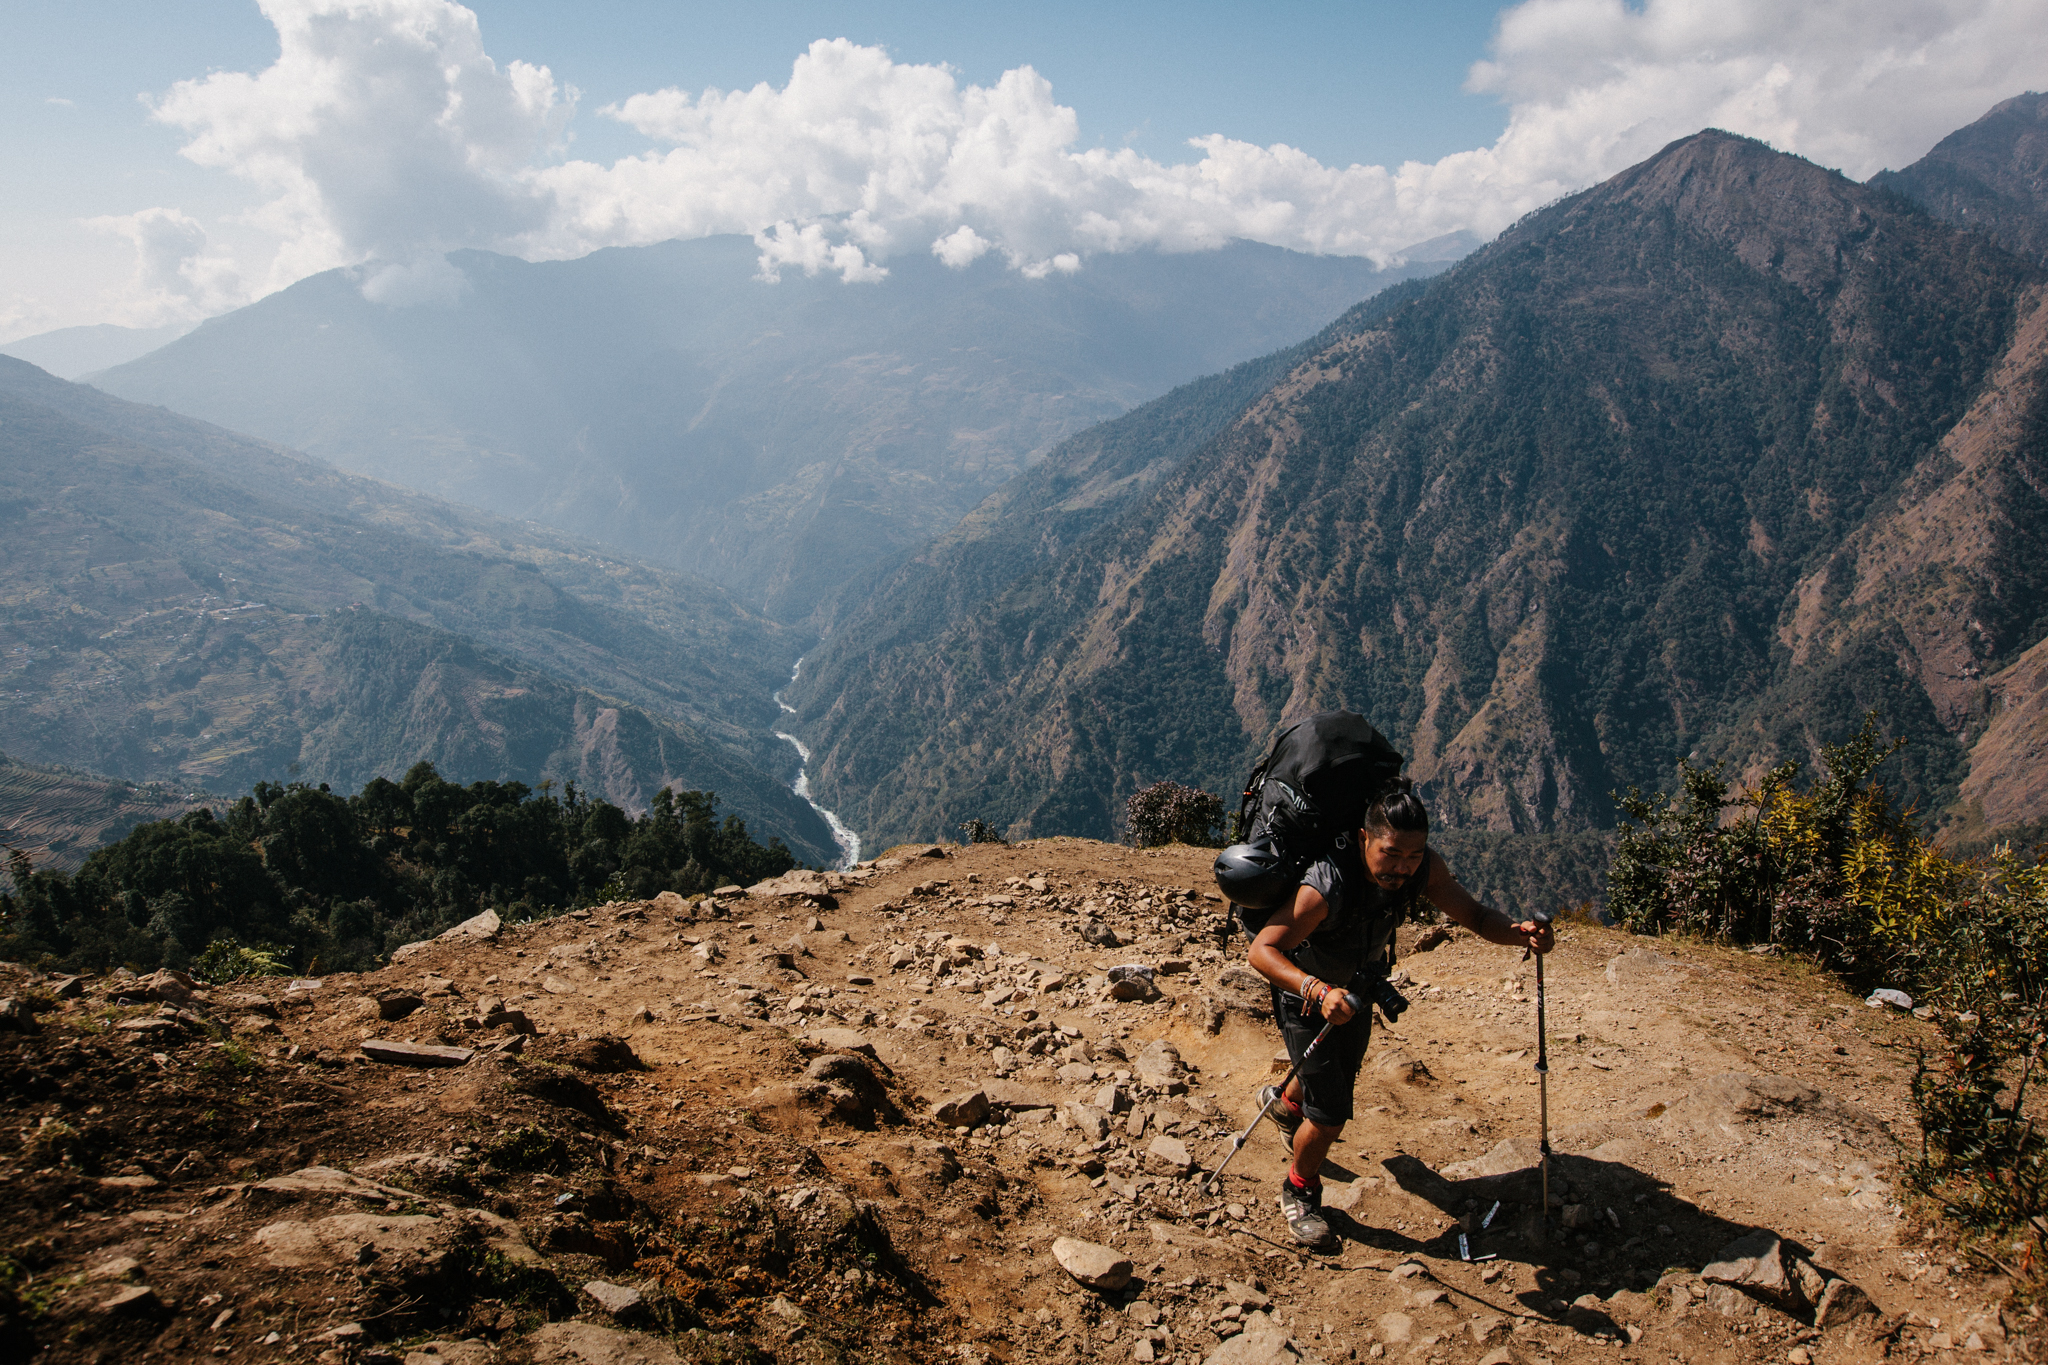 Hiking Nepal In Edmund Hillary’s Footsteps